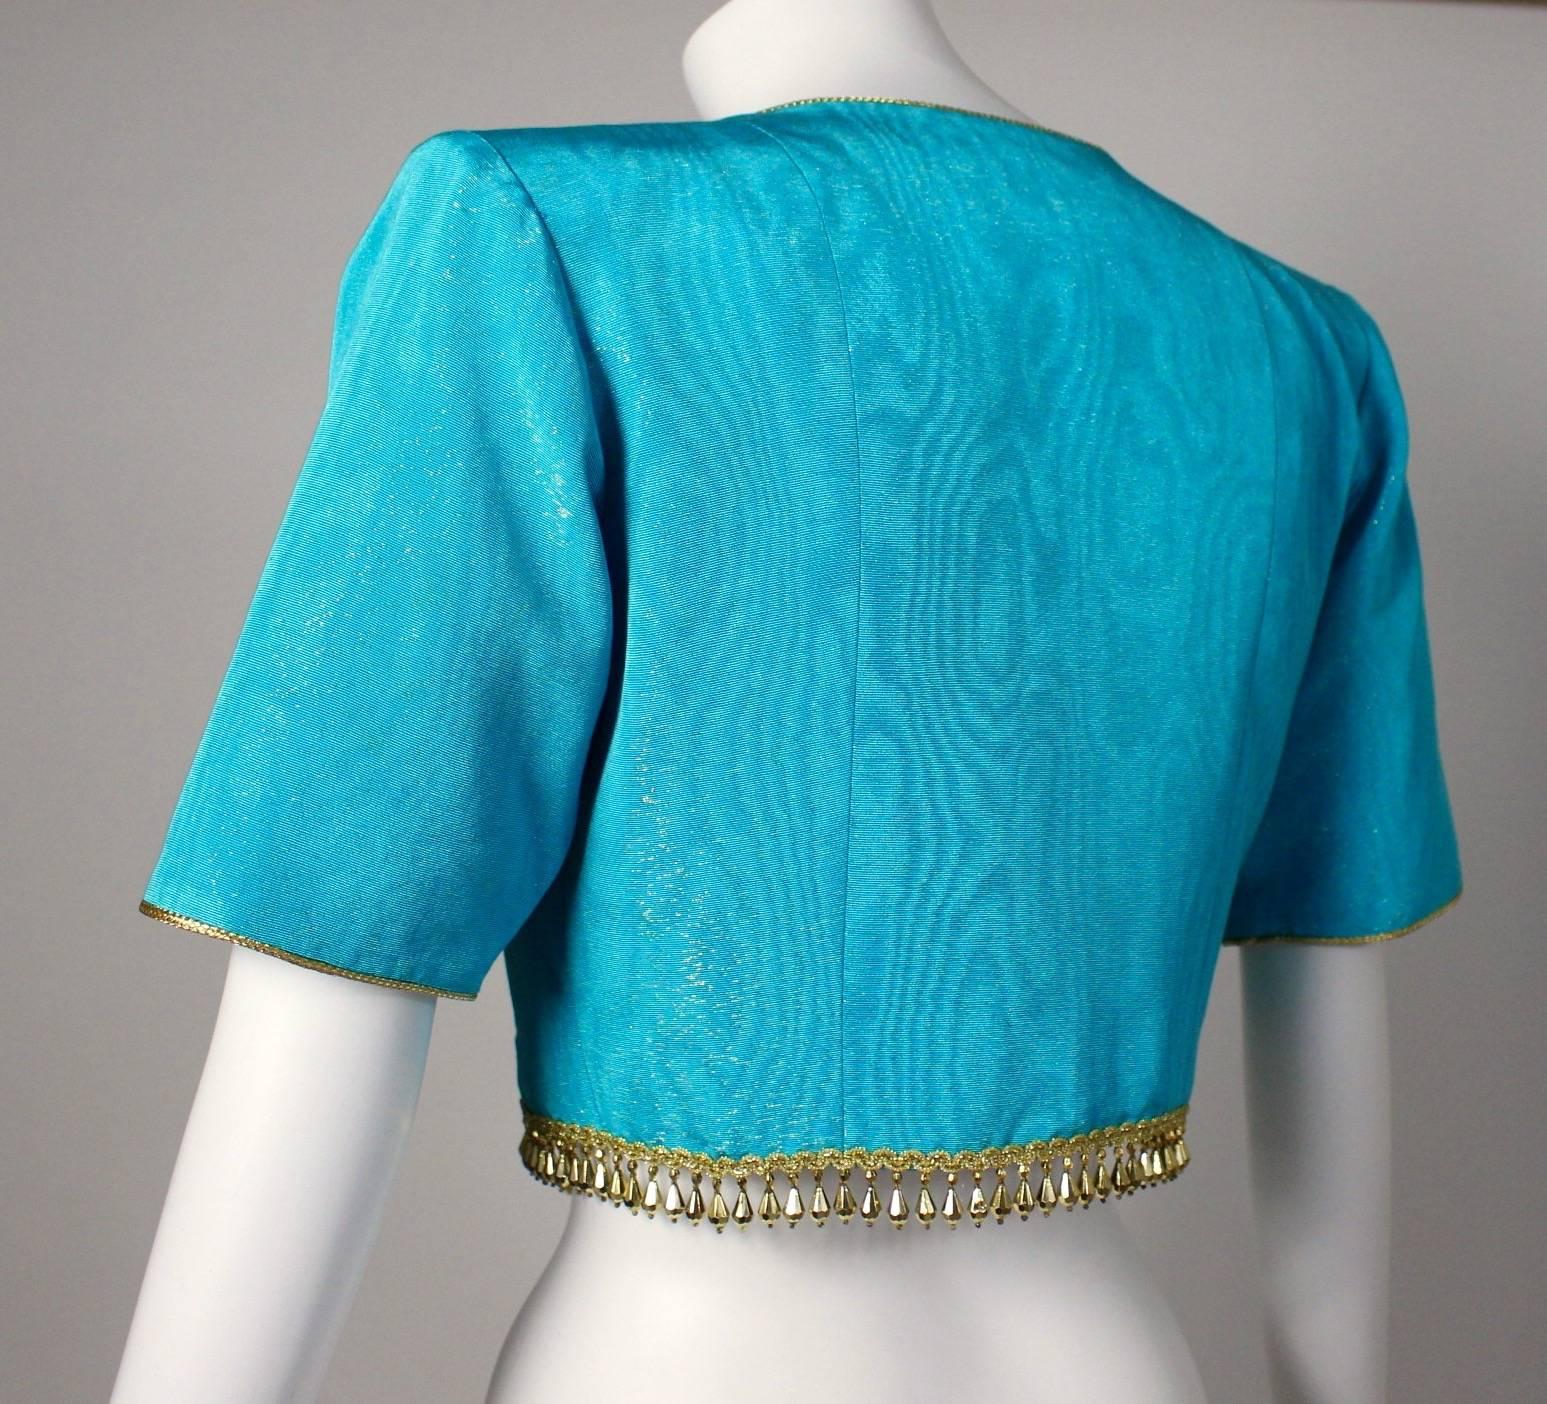 1993 Yves Saint Laurent Documented Moire Gold Silk Tassel Beads Jacket YSL In Excellent Condition For Sale In Boca Raton, FL